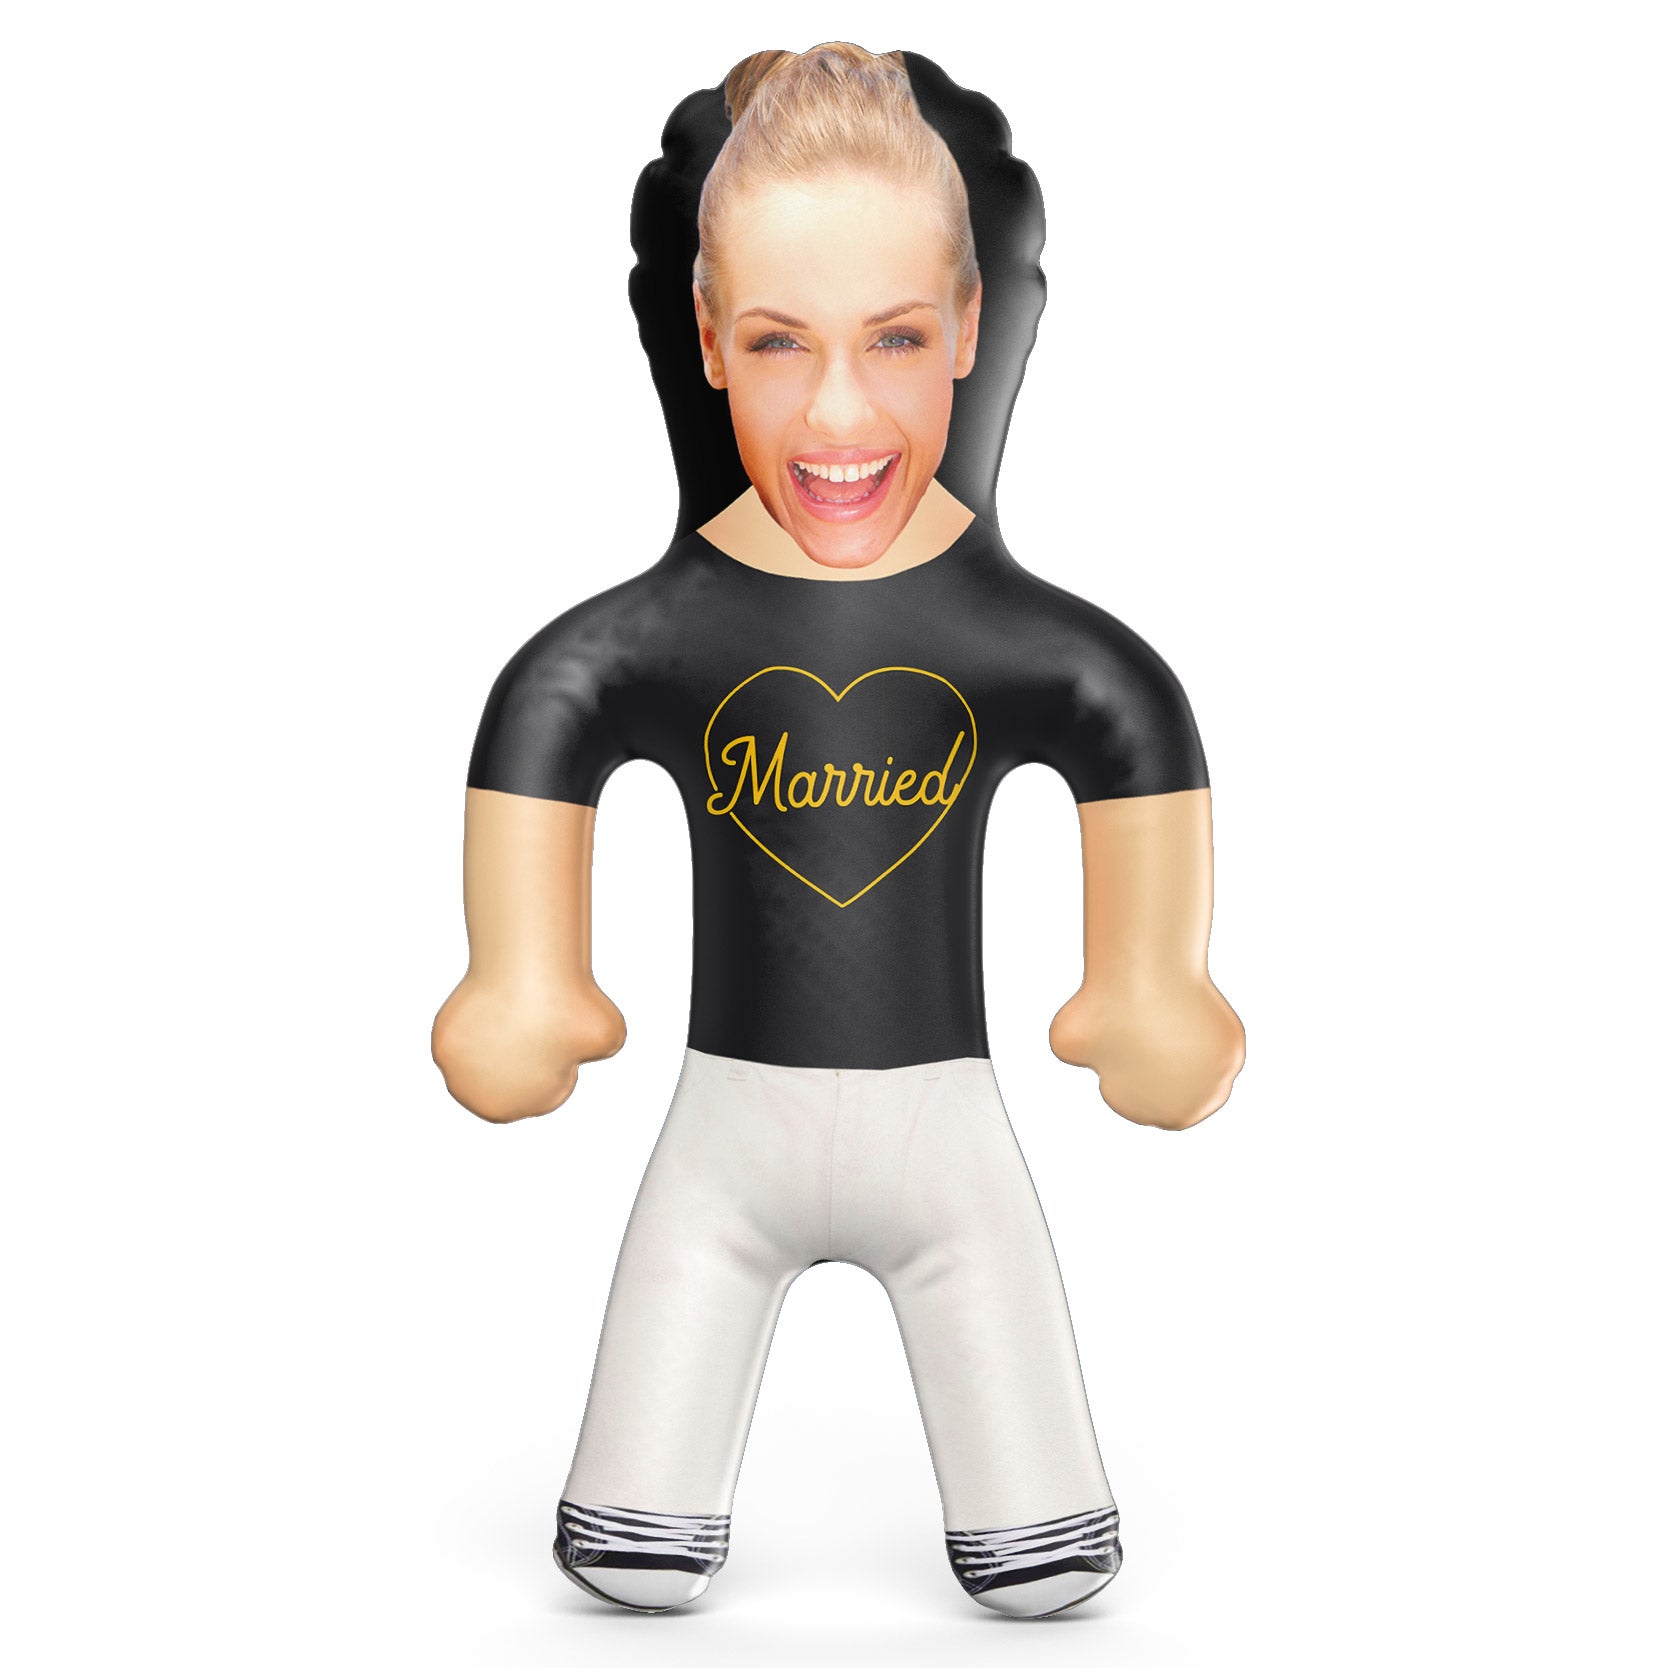 Married Inflatable Doll - Custom Blow Up Doll